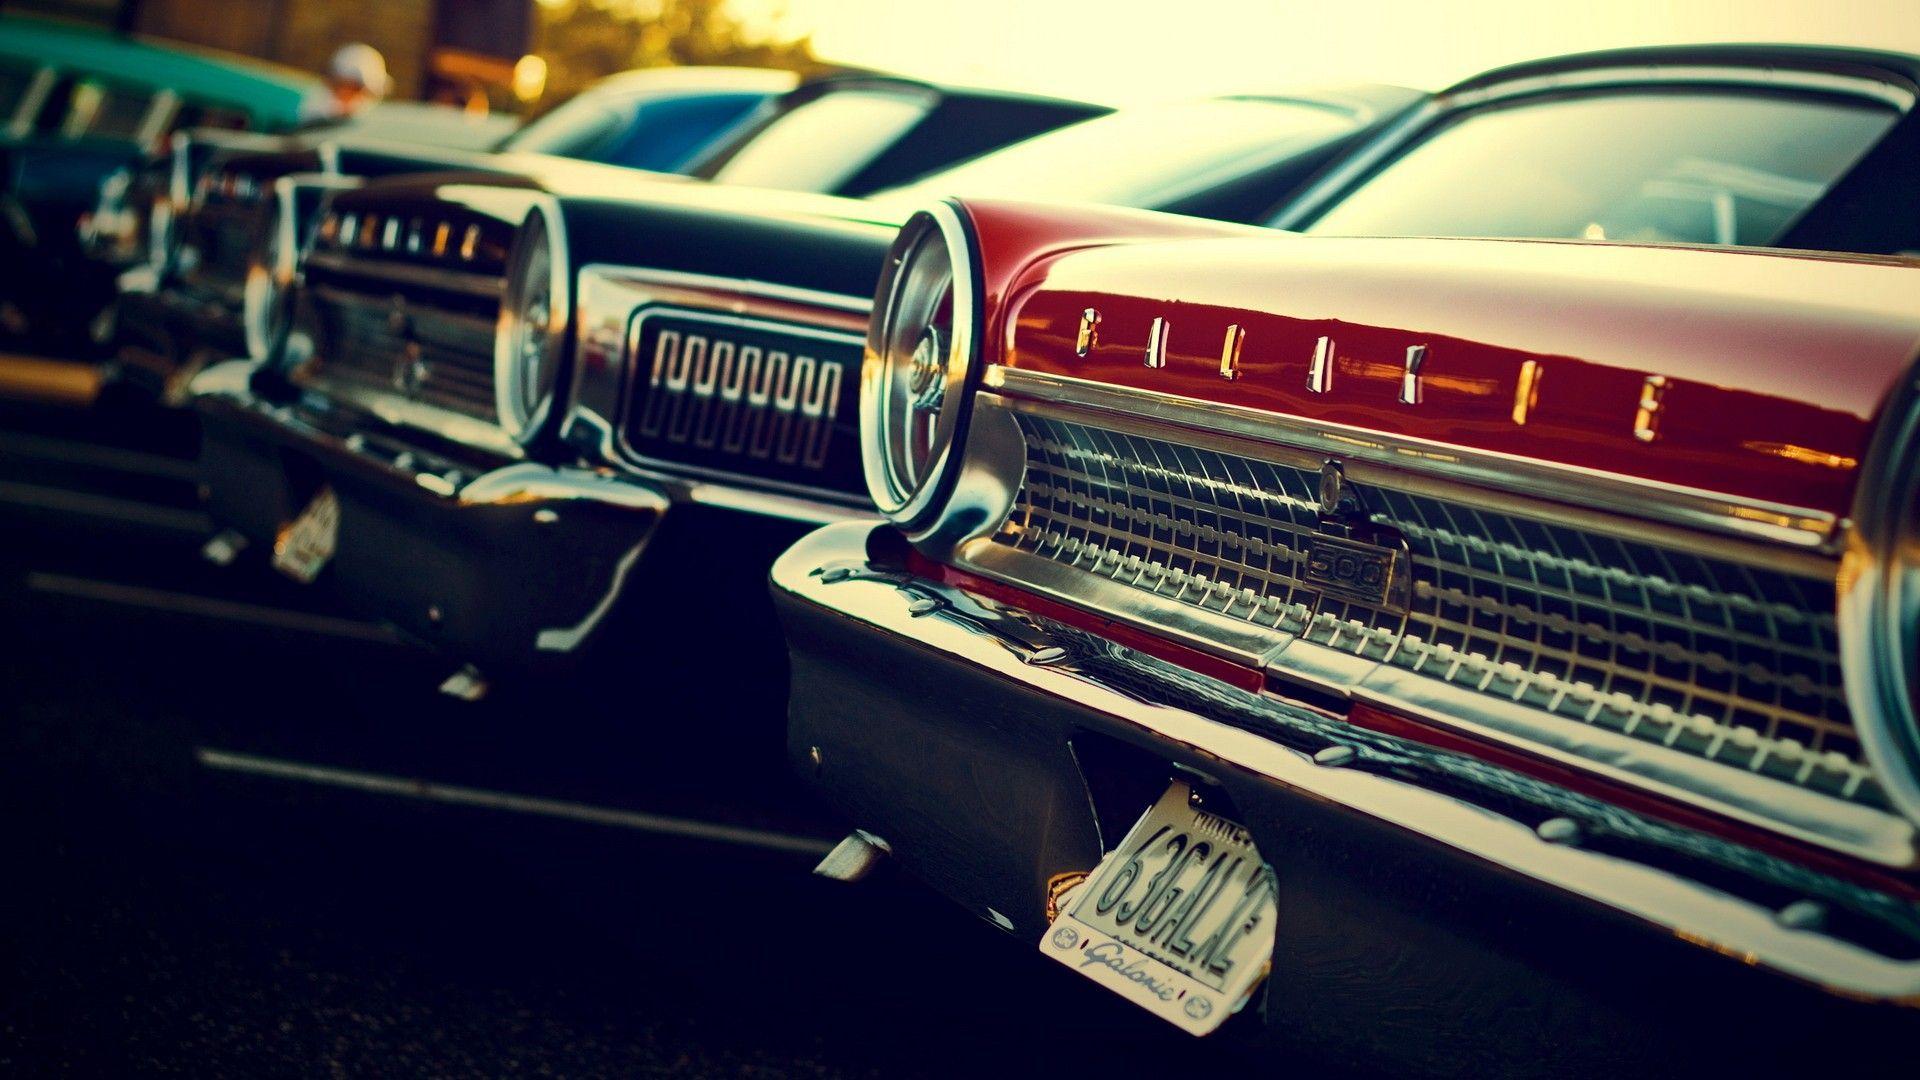 Hd Wallpaper Of Old Cars 52 with HD Wallpaper Of Old Cars